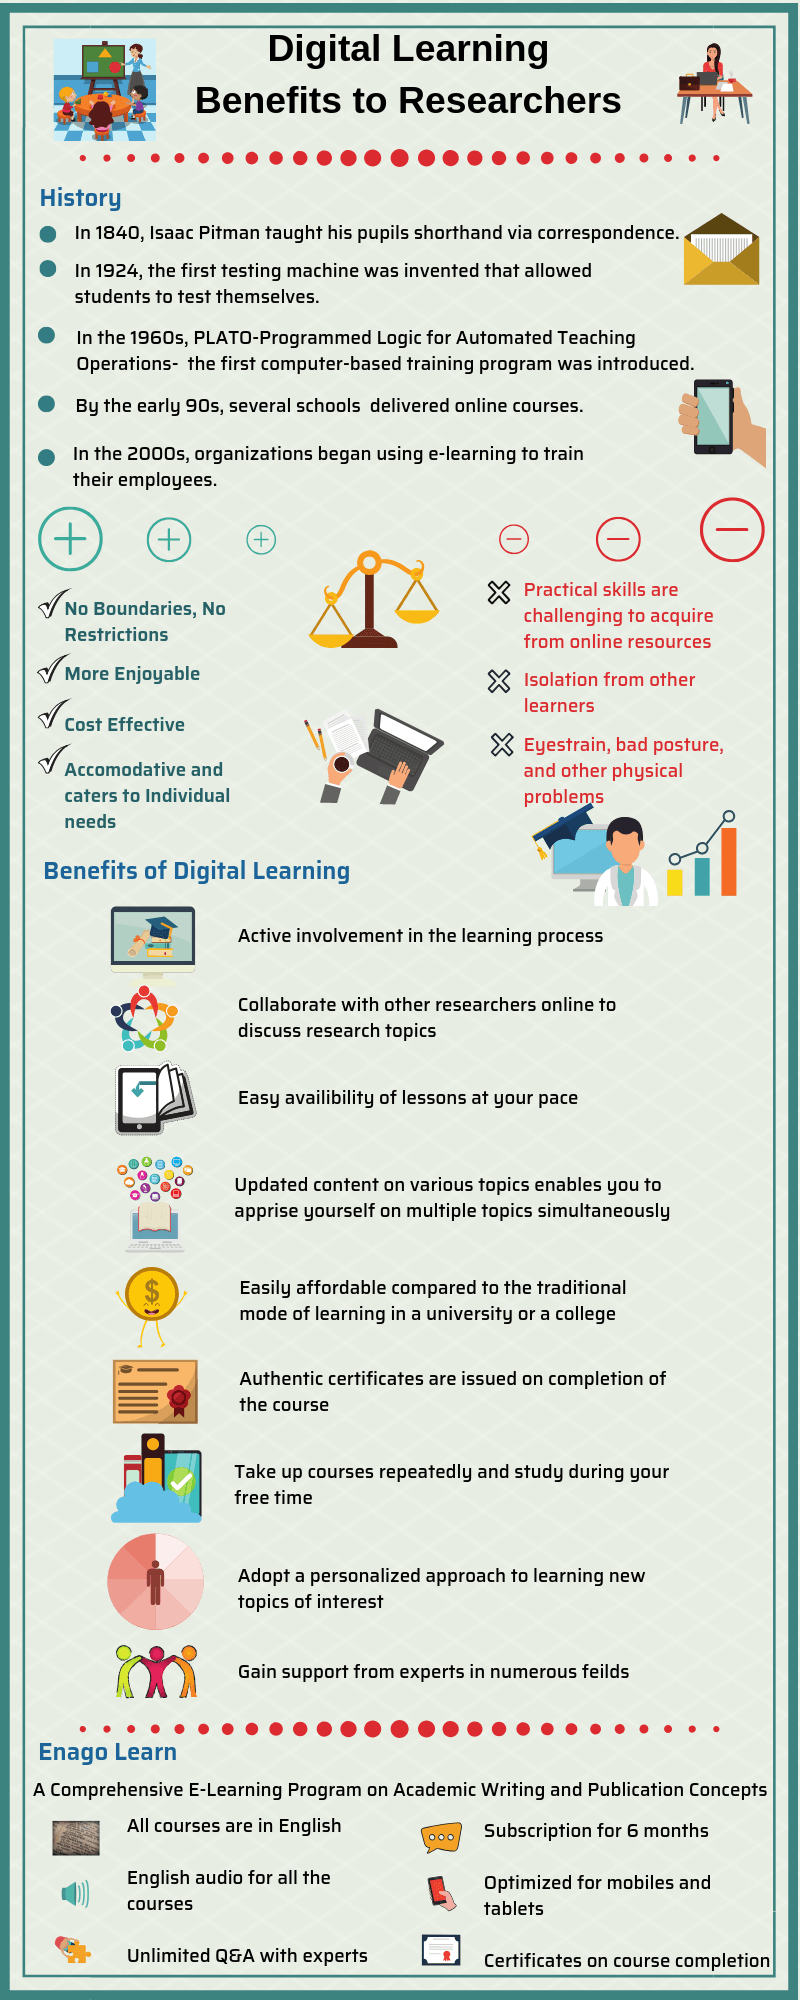 Digital Learning and Its Benefits to Researchers - Enago Academy